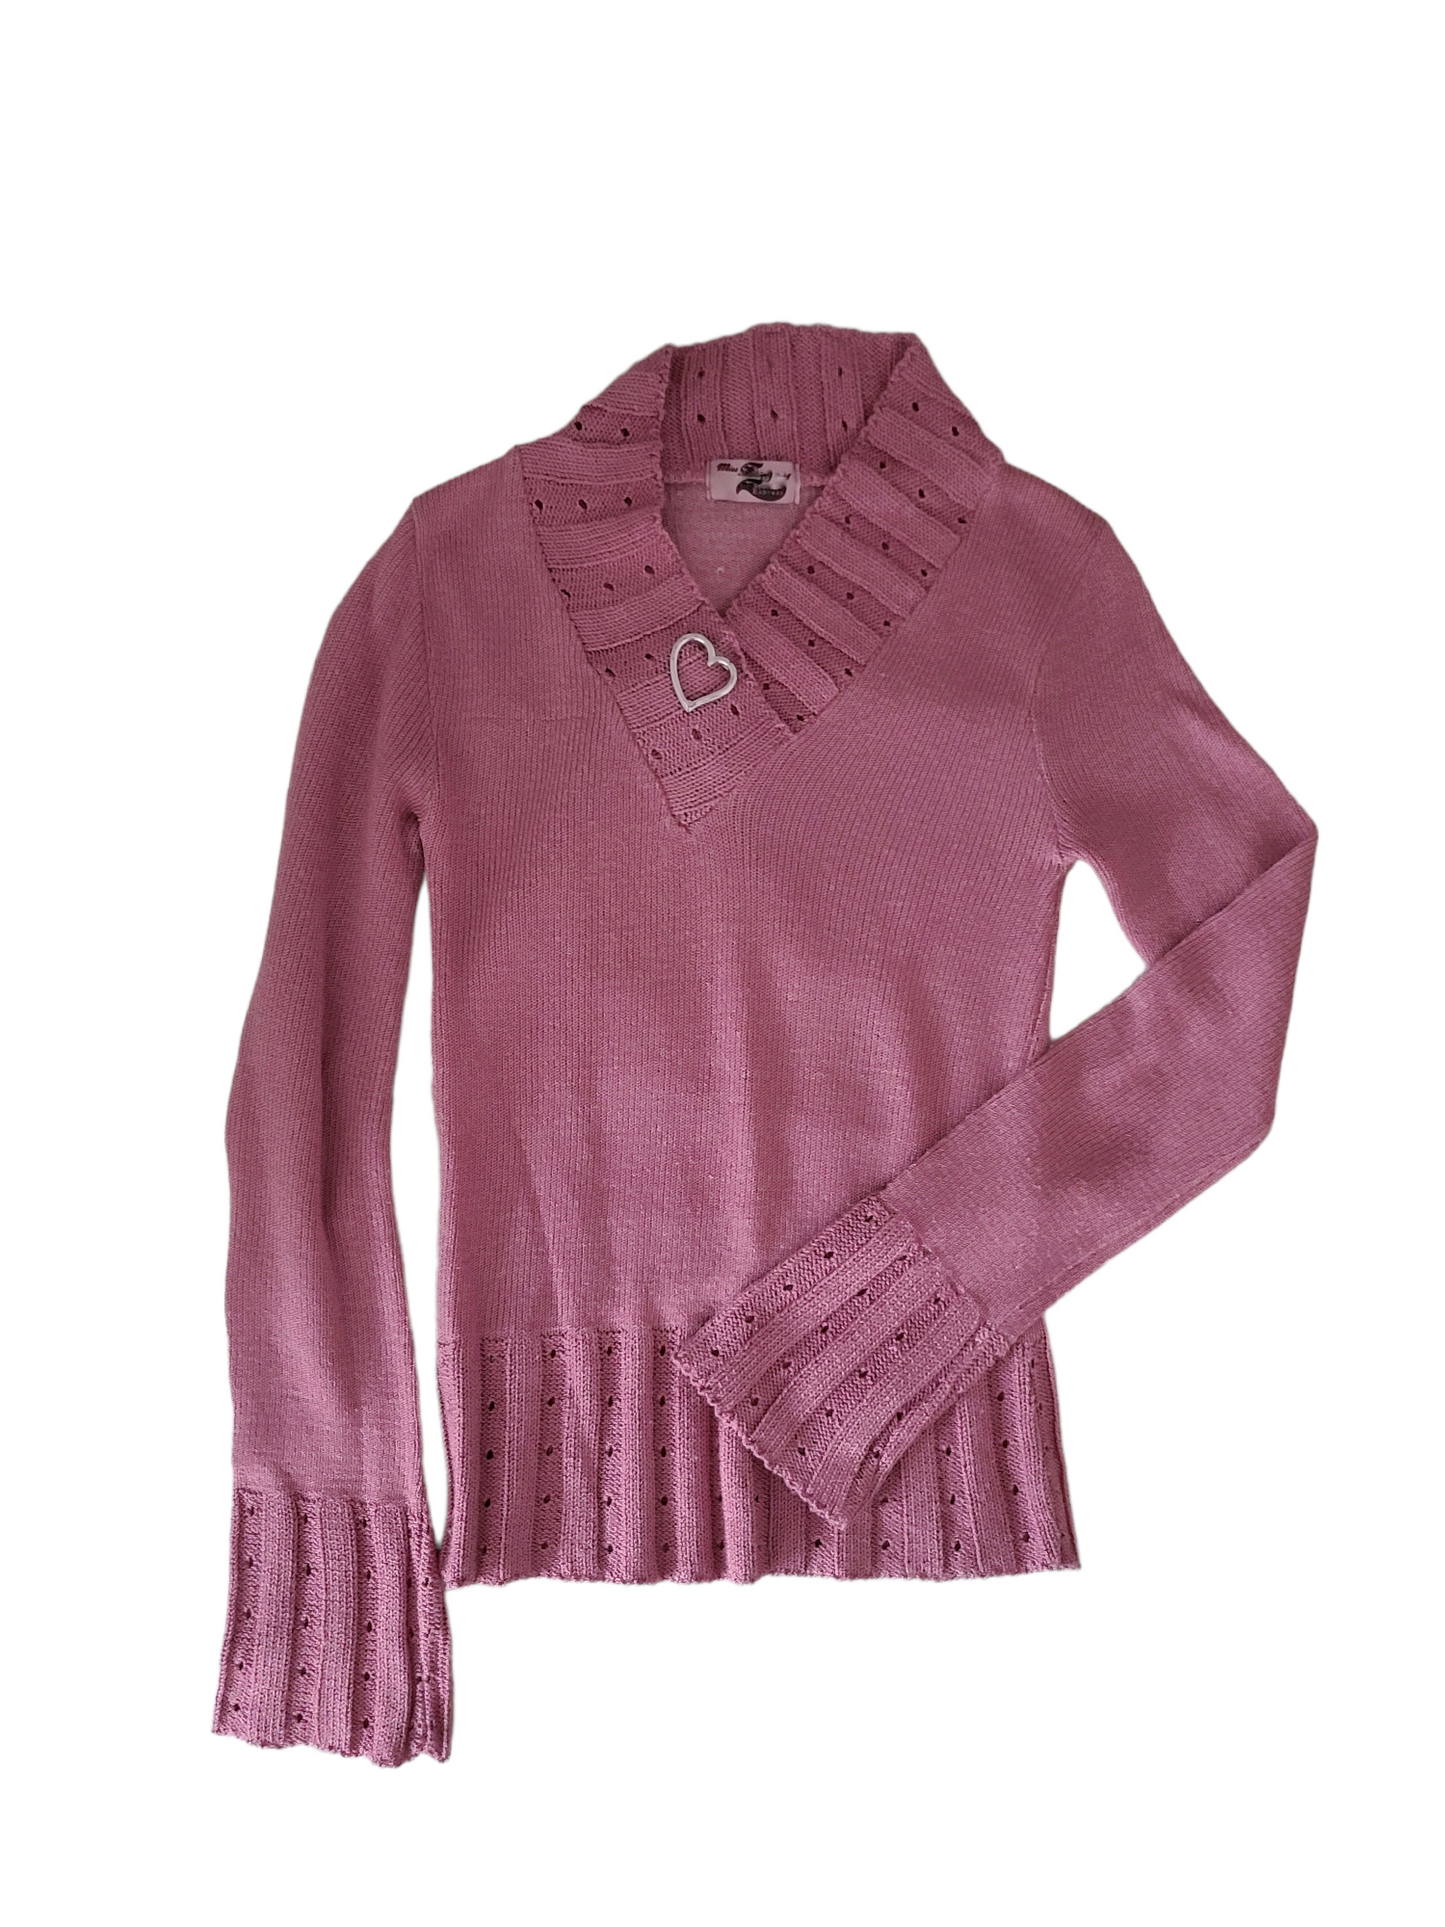 Coquette pink 90s sweater cutz girly